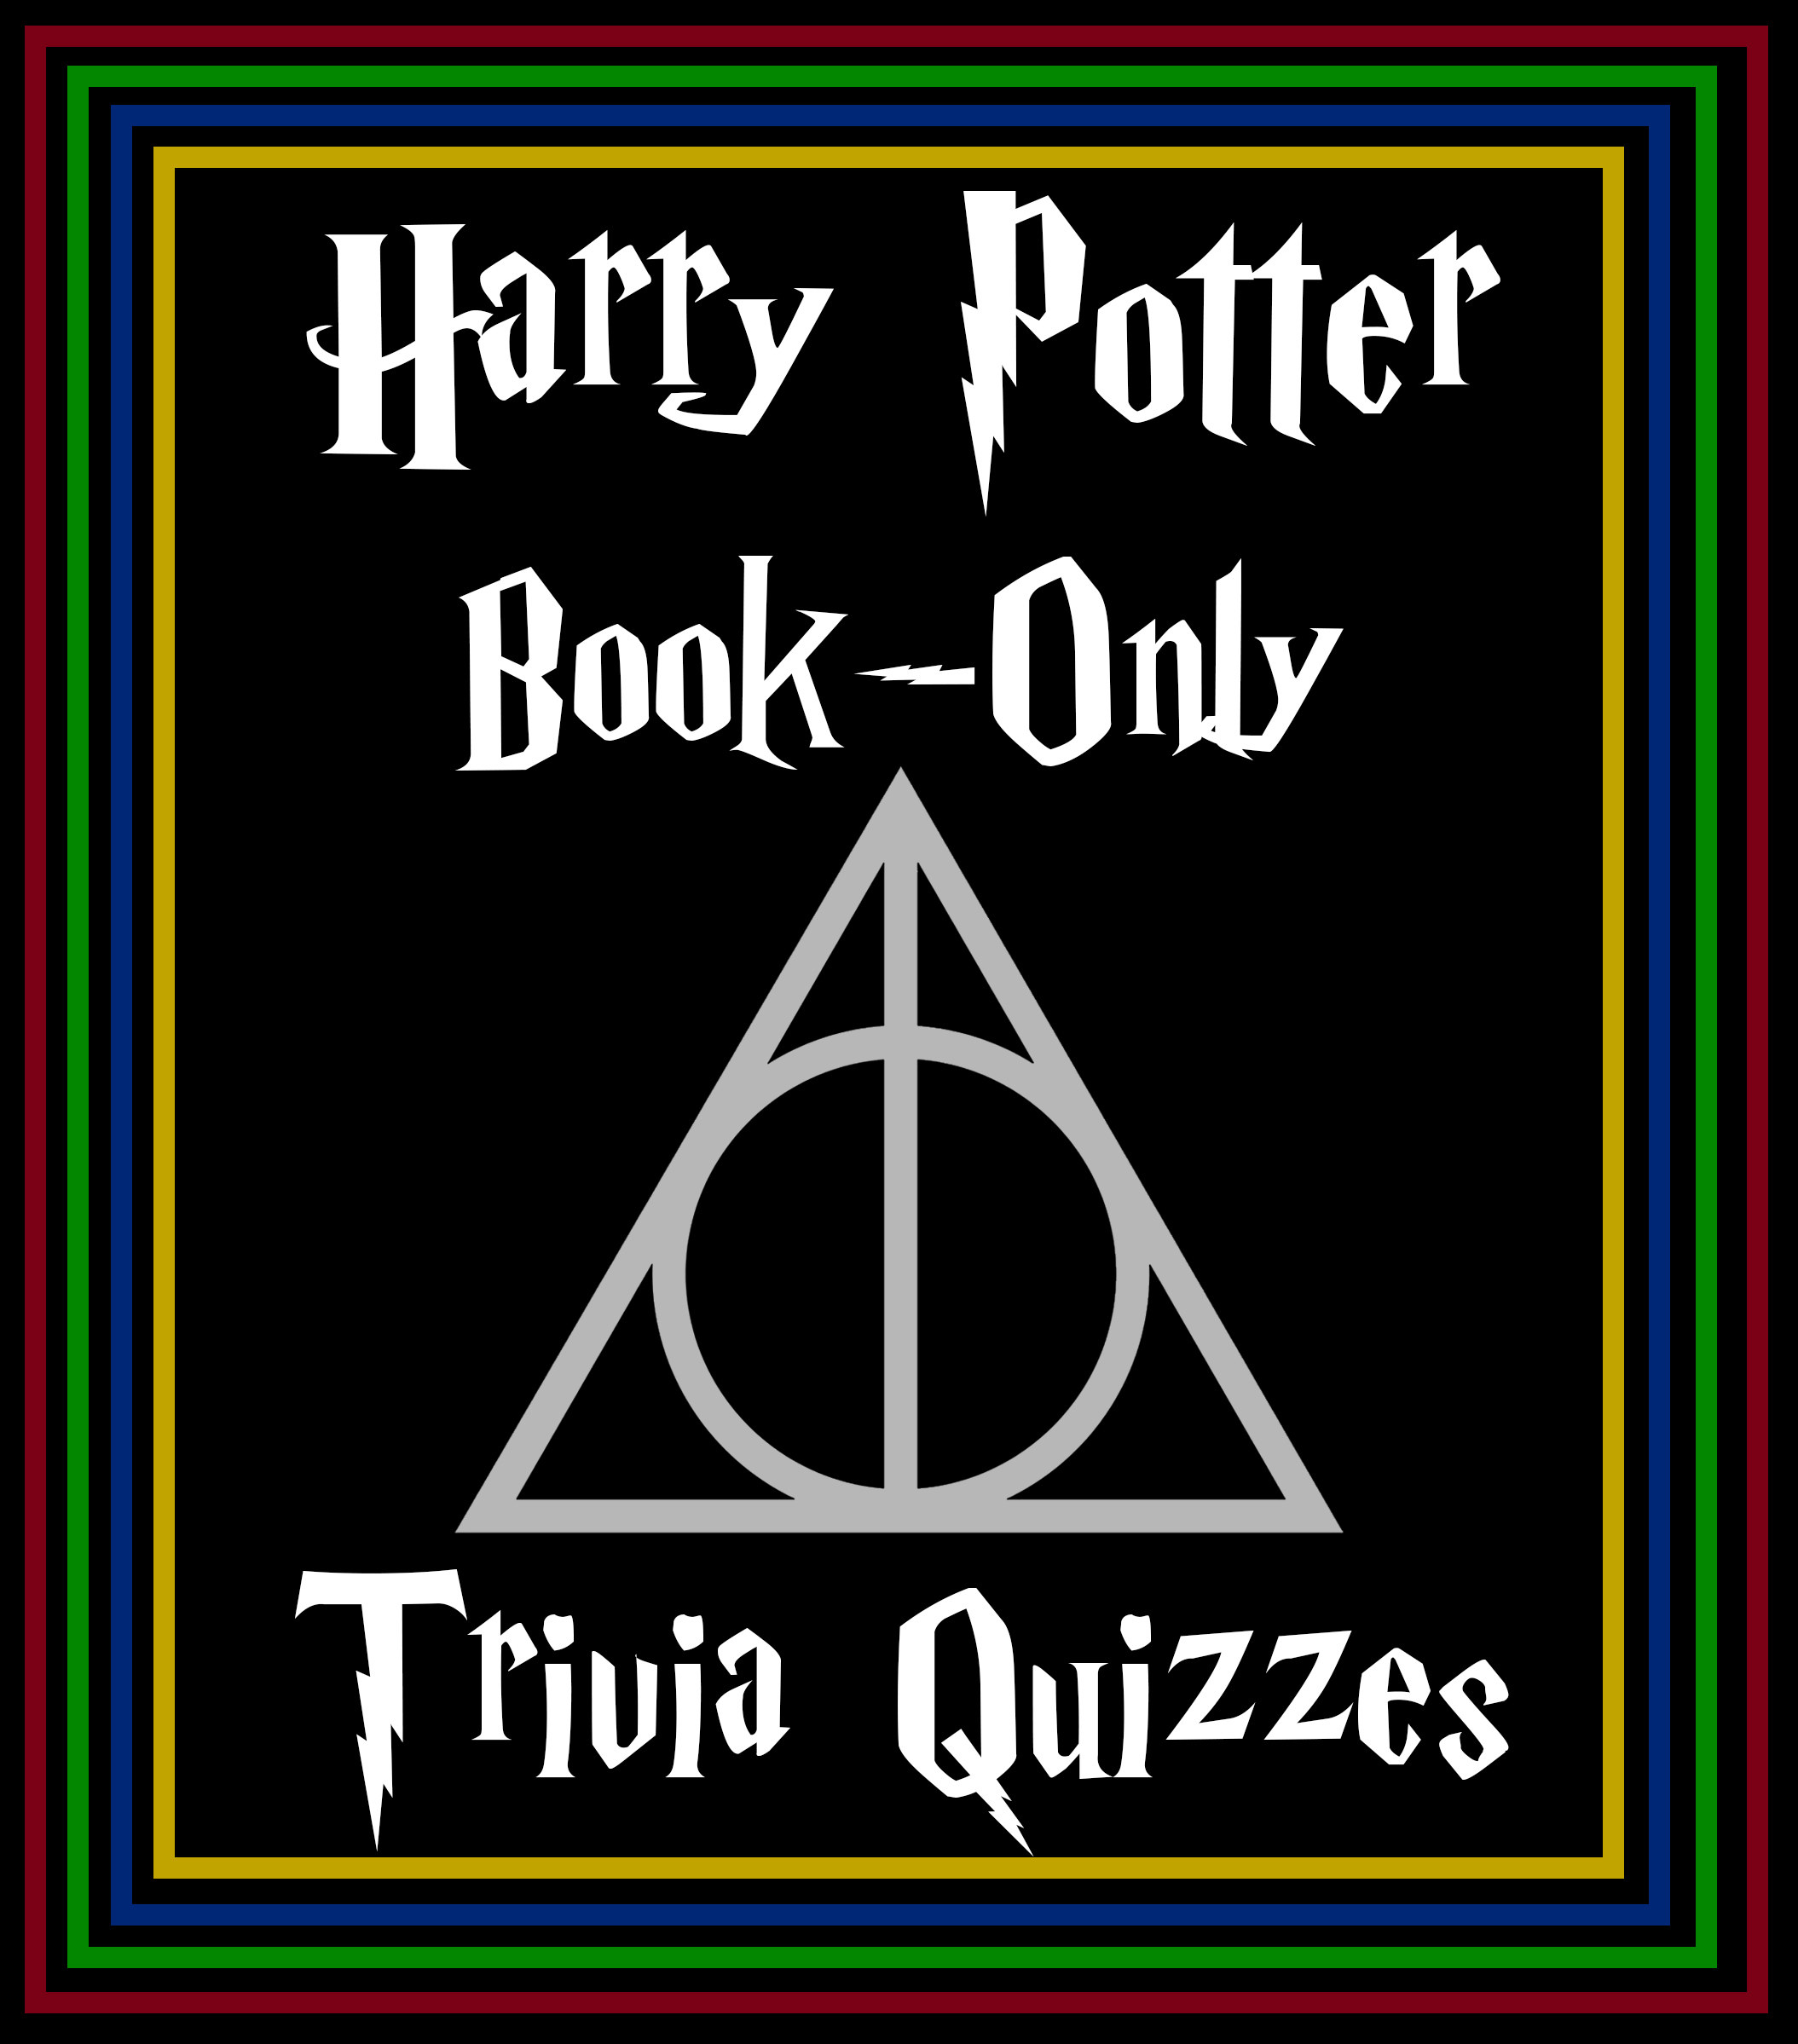 Harry Potter Book Hard Trivia Quizess